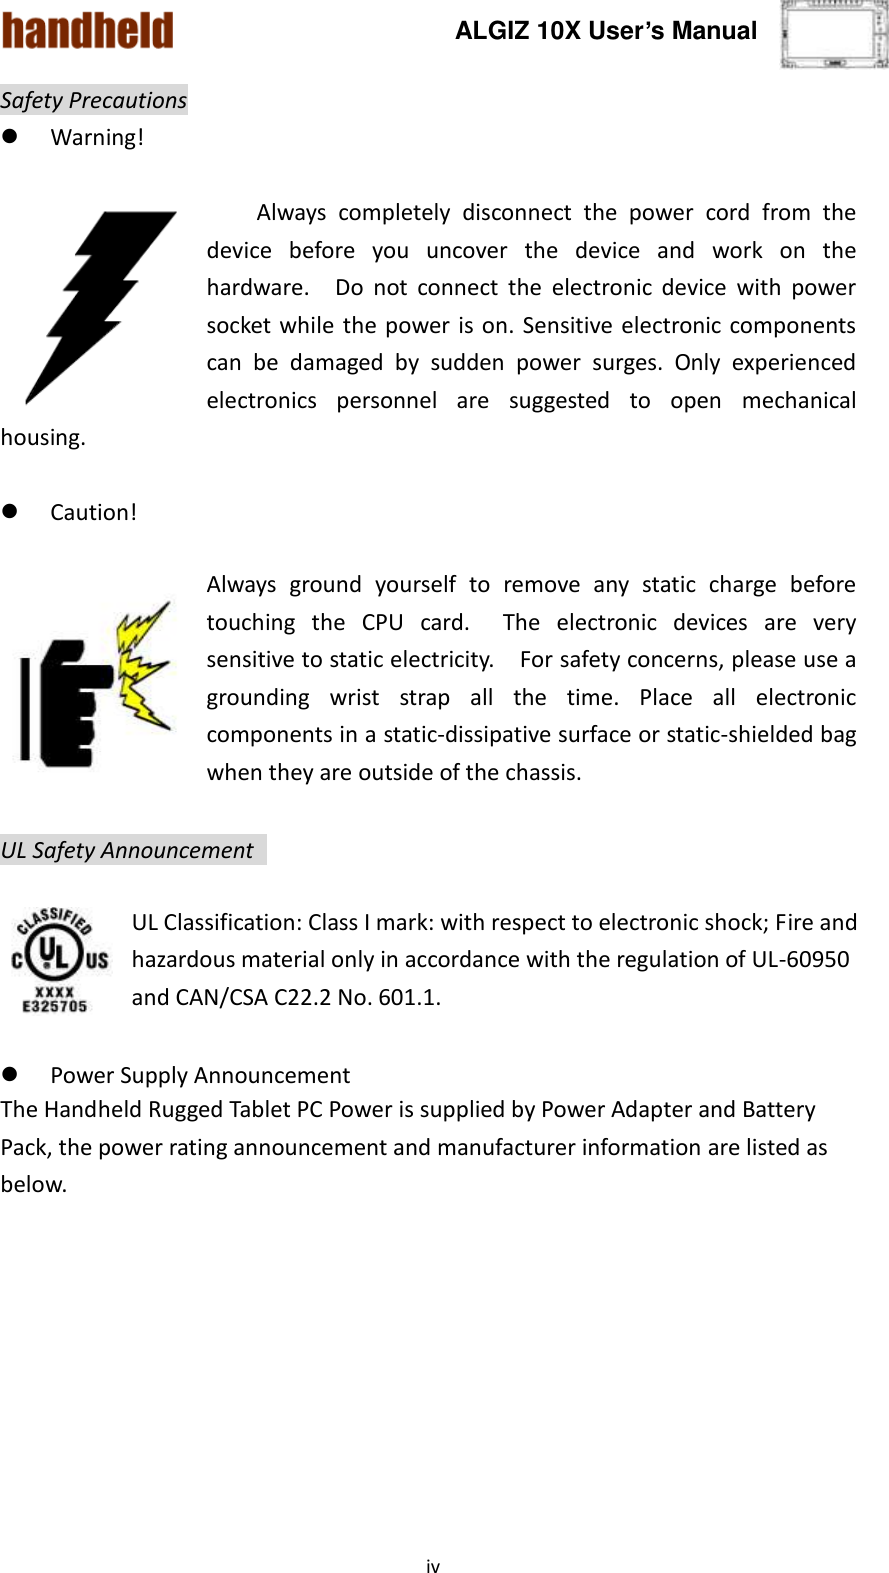 ALGIZ 10X User’s Manual    iv Safety Precautions  Warning!  Always  completely  disconnect  the  power  cord  from  the device  before  you  uncover  the  device  and  work  on the hardware.    Do  not  connect  the  electronic  device  with  power socket while the  power is on. Sensitive electronic components can  be  damaged  by  sudden  power  surges.  Only  experienced electronics  personnel  are  suggested  to  open  mechanical housing.   Caution!  Always  ground  yourself  to  remove  any  static  charge  before touching  the  CPU  card.  The  electronic  devices  are  very sensitive to static electricity.    For safety concerns, please use a grounding  wrist  strap  all  the  time.  Place  all  electronic components in a static-dissipative surface or static-shielded bag when they are outside of the chassis.  UL Safety Announcement    UL Classification: Class I mark: with respect to electronic shock; Fire and hazardous material only in accordance with the regulation of UL-60950 and CAN/CSA C22.2 No. 601.1.   Power Supply Announcement The Handheld Rugged Tablet PC Power is supplied by Power Adapter and Battery Pack, the power rating announcement and manufacturer information are listed as below.   